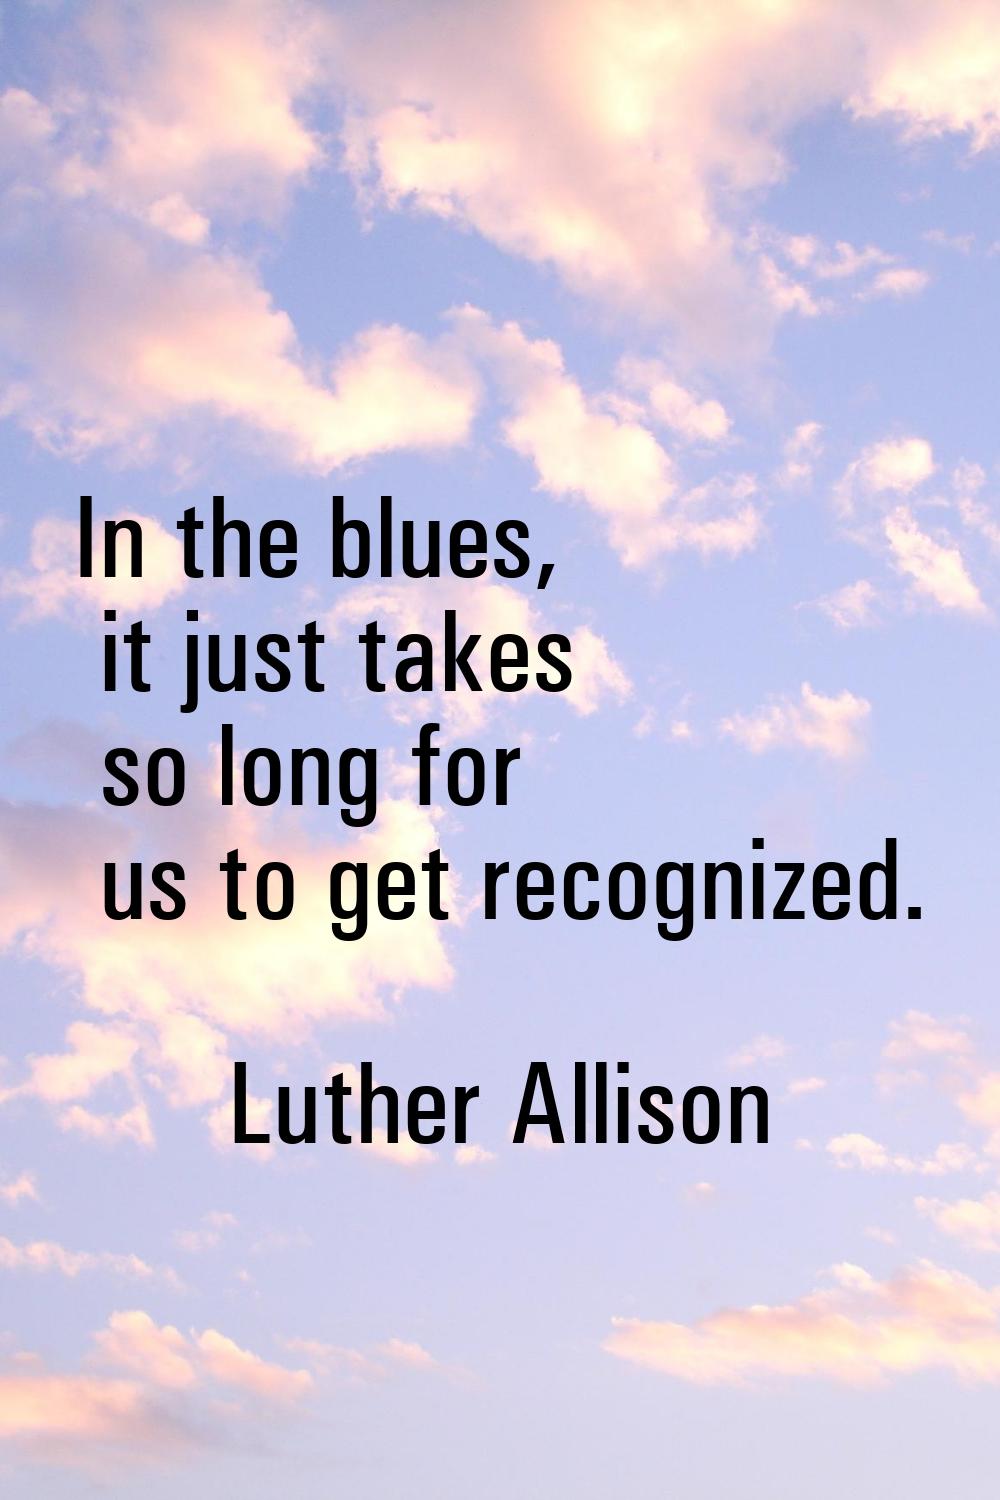 In the blues, it just takes so long for us to get recognized.